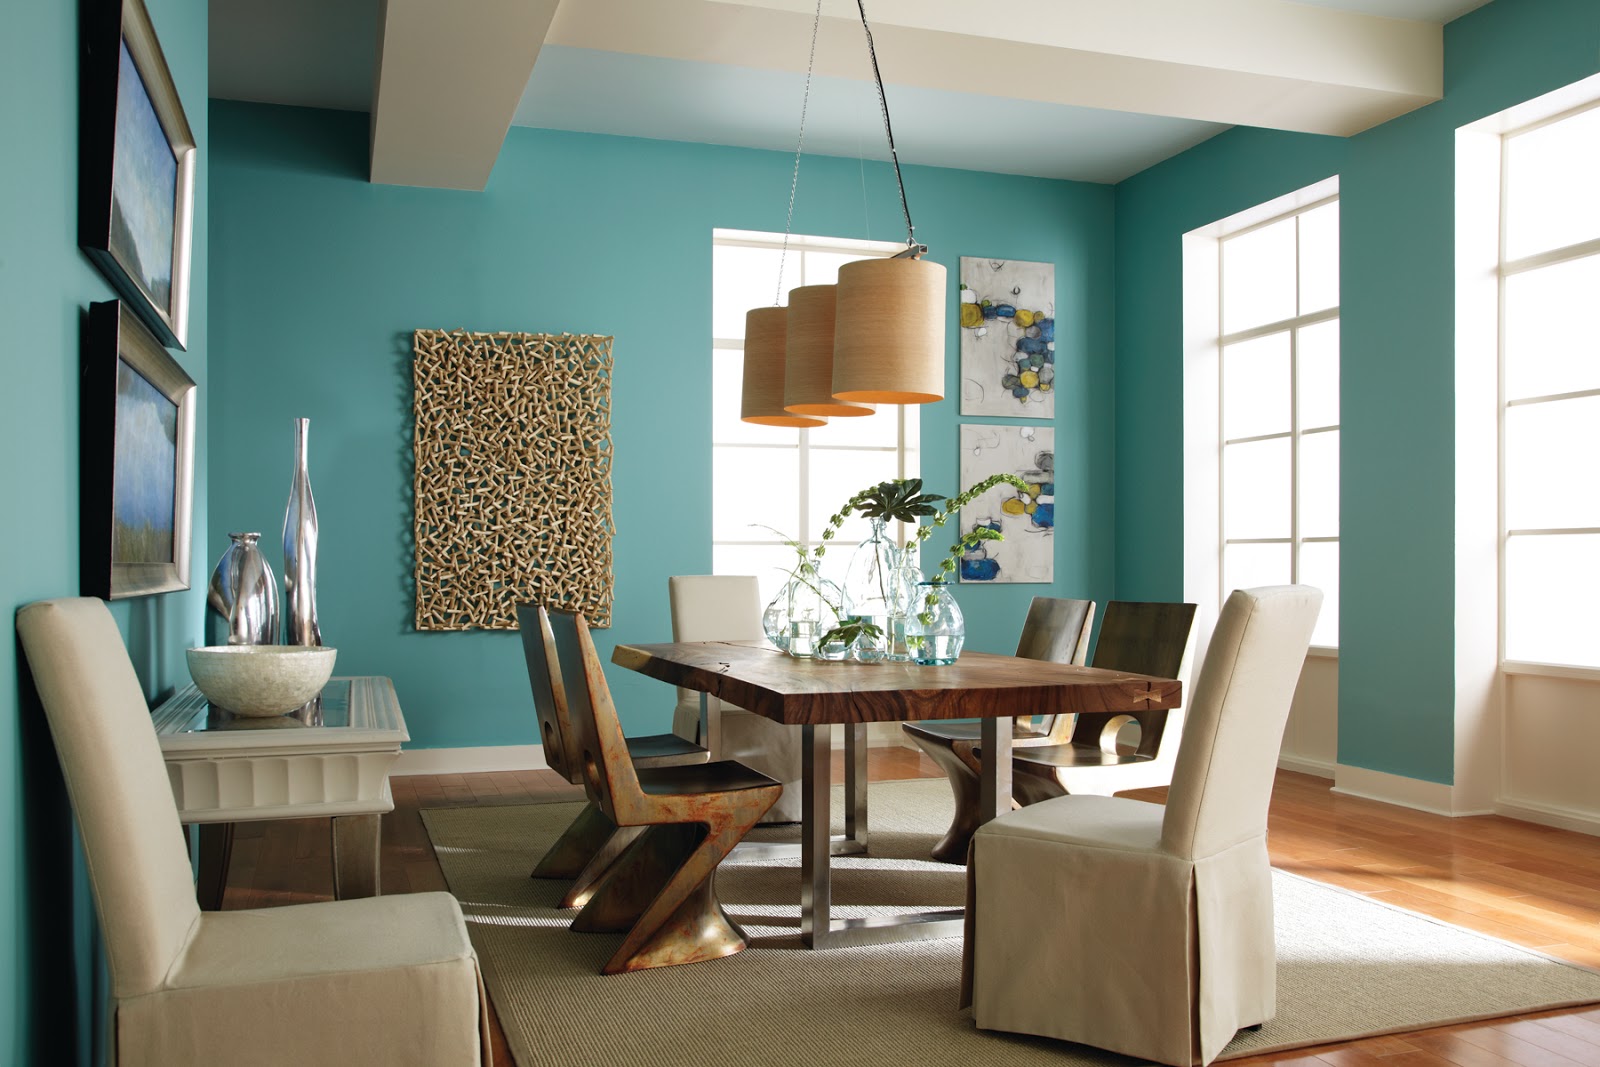 Susan Hawke : Decorating Trends 2014: How to add intrigue to a ...